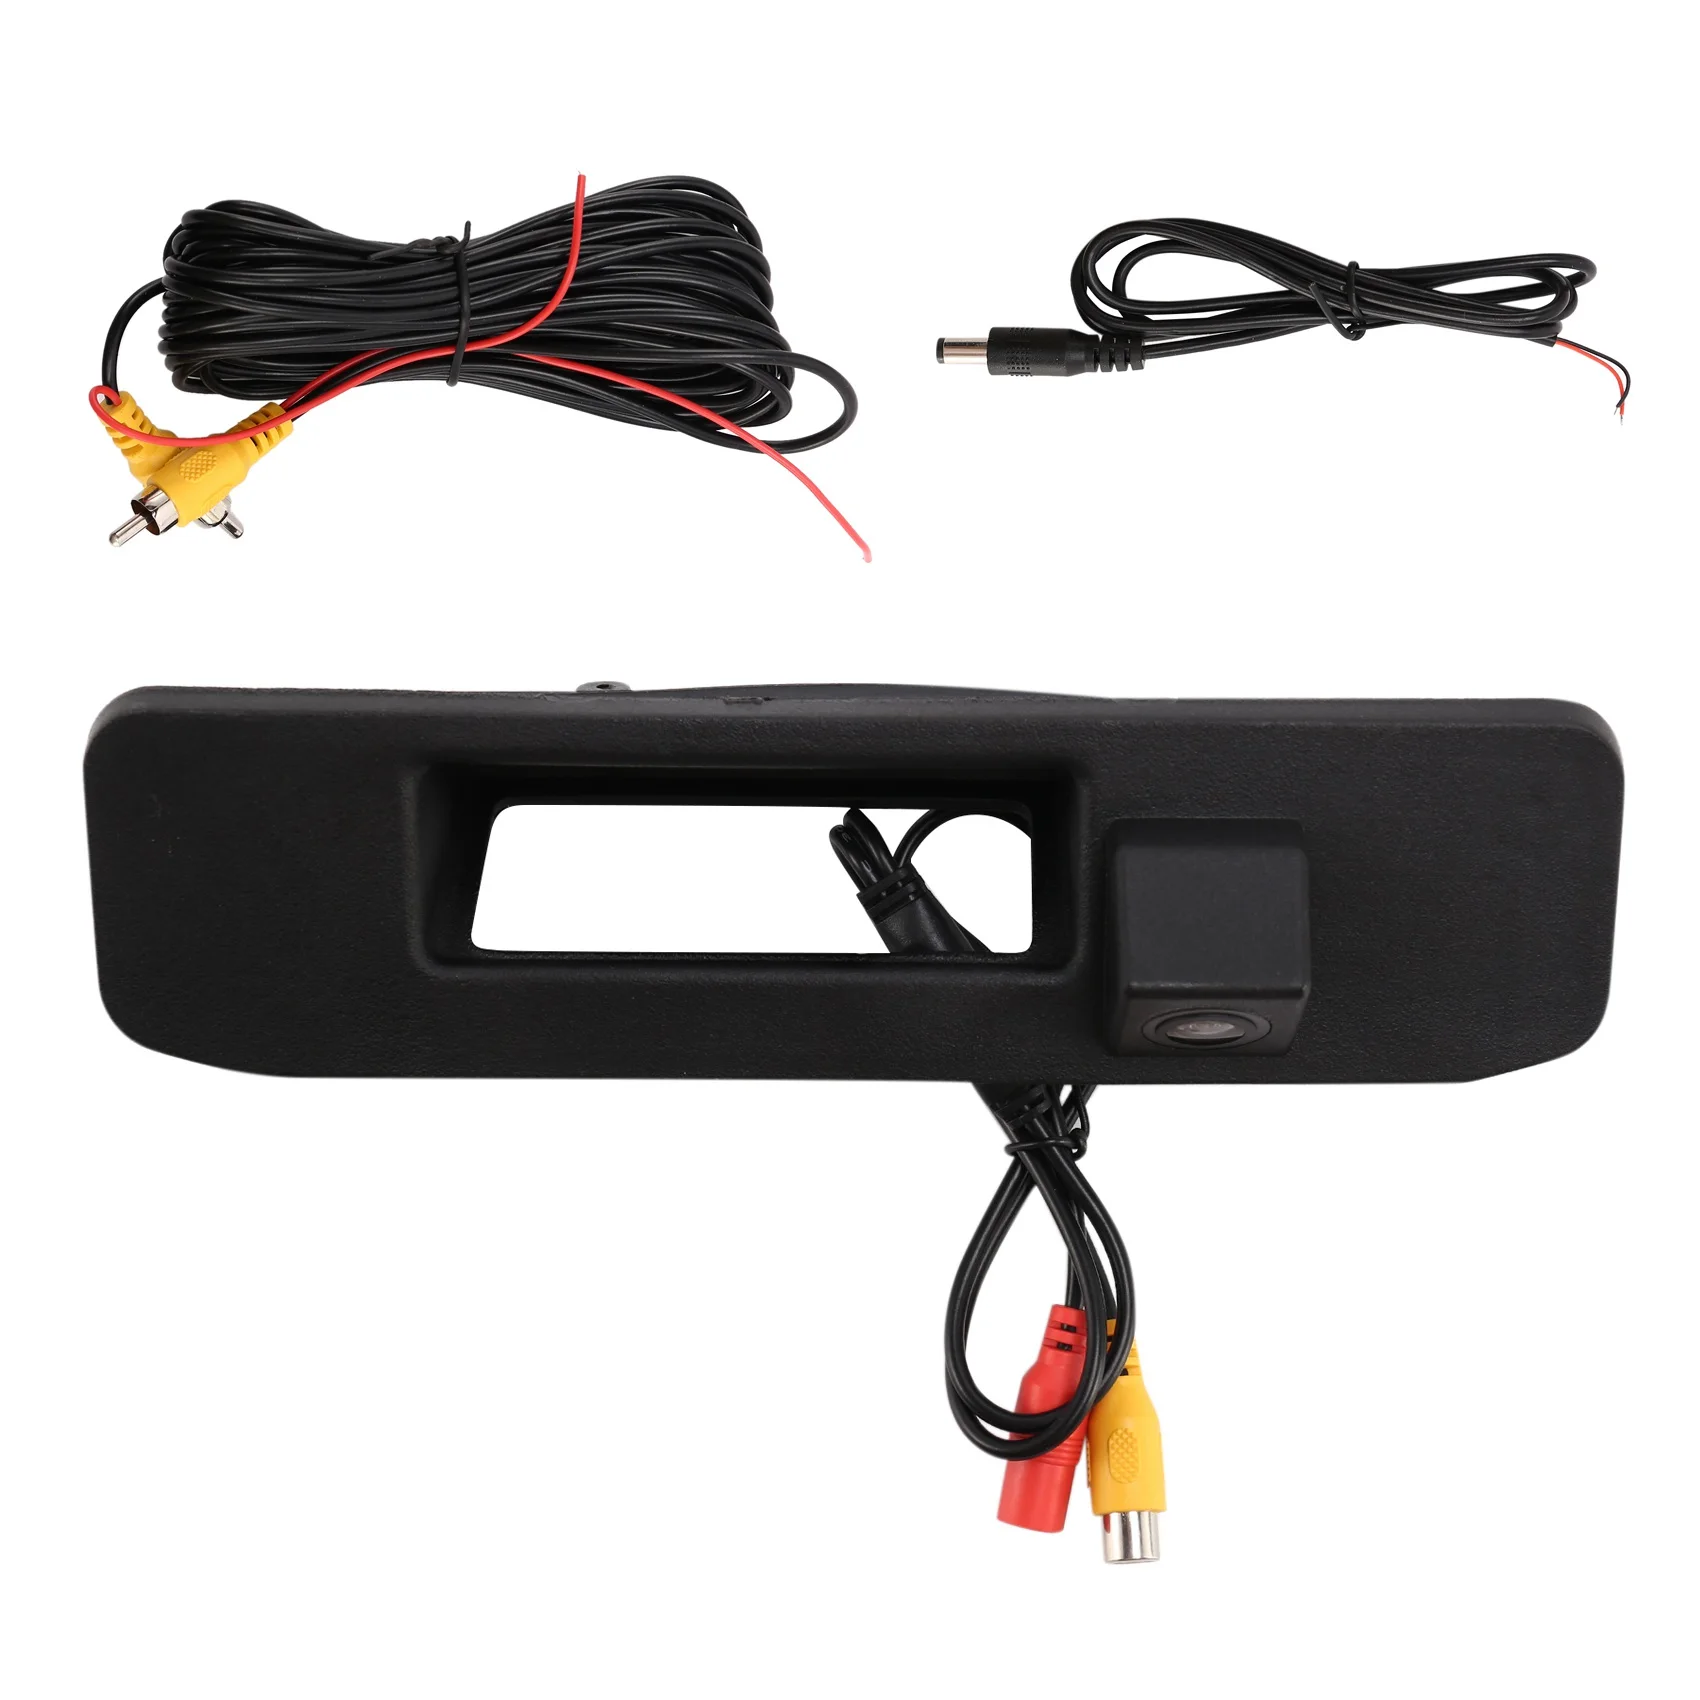 

Trunk Handle Rear View Backup Camera for Mercedes Benz A CLA GLA GLC GLE M/ML GL/GLS GLK-Class Vito with Parking Line